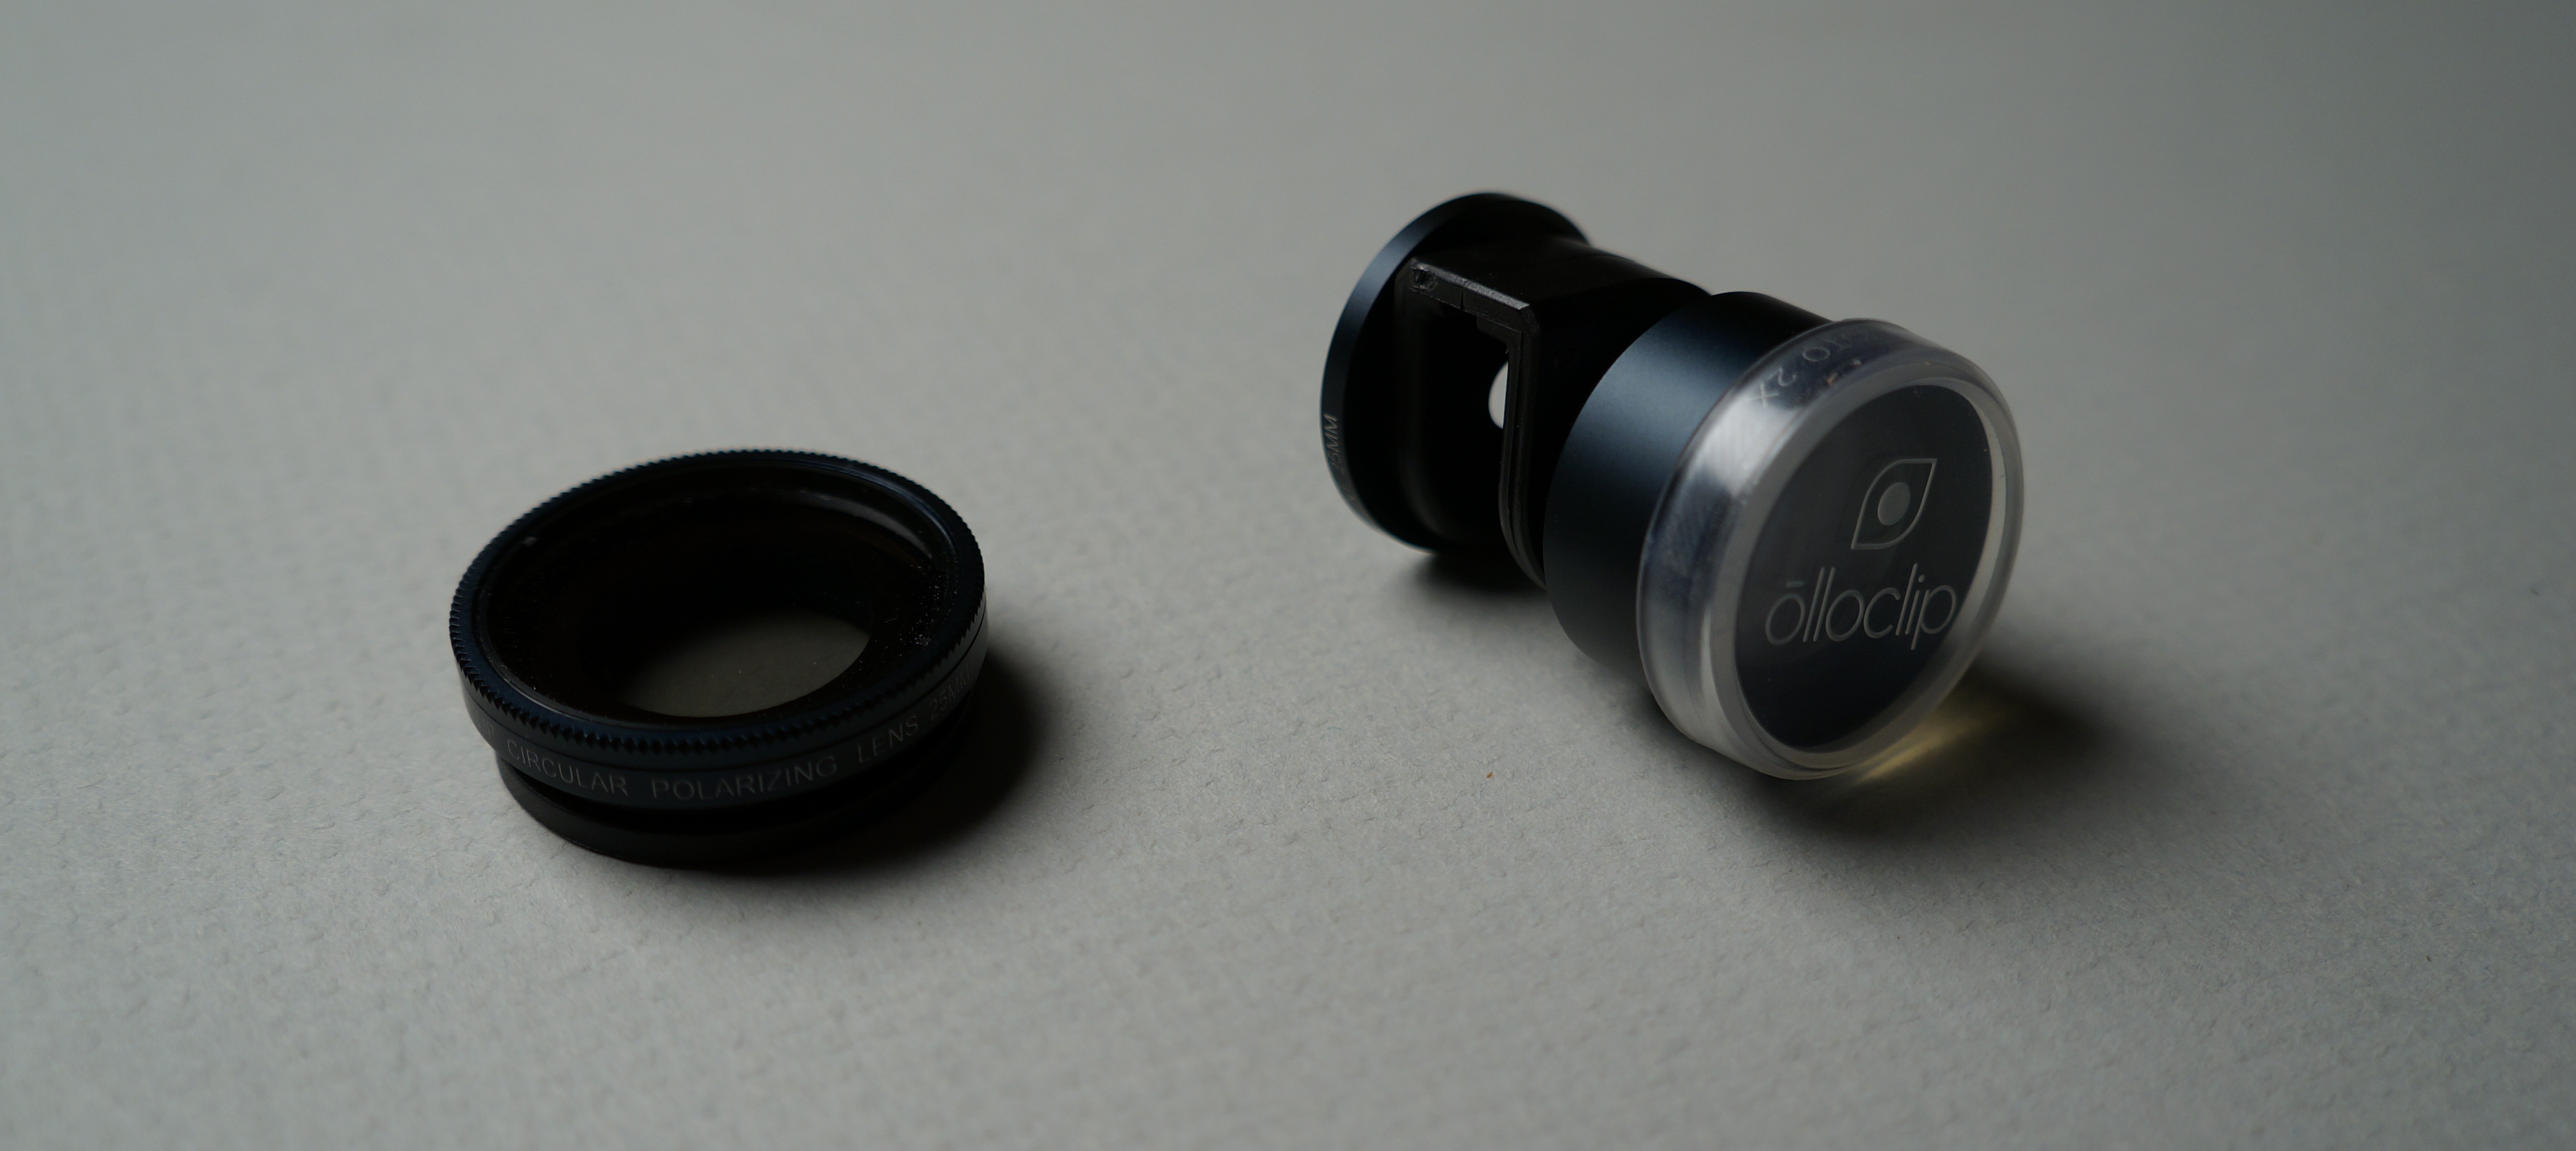 olloclip iPhone 5 Telephoto Lens Review